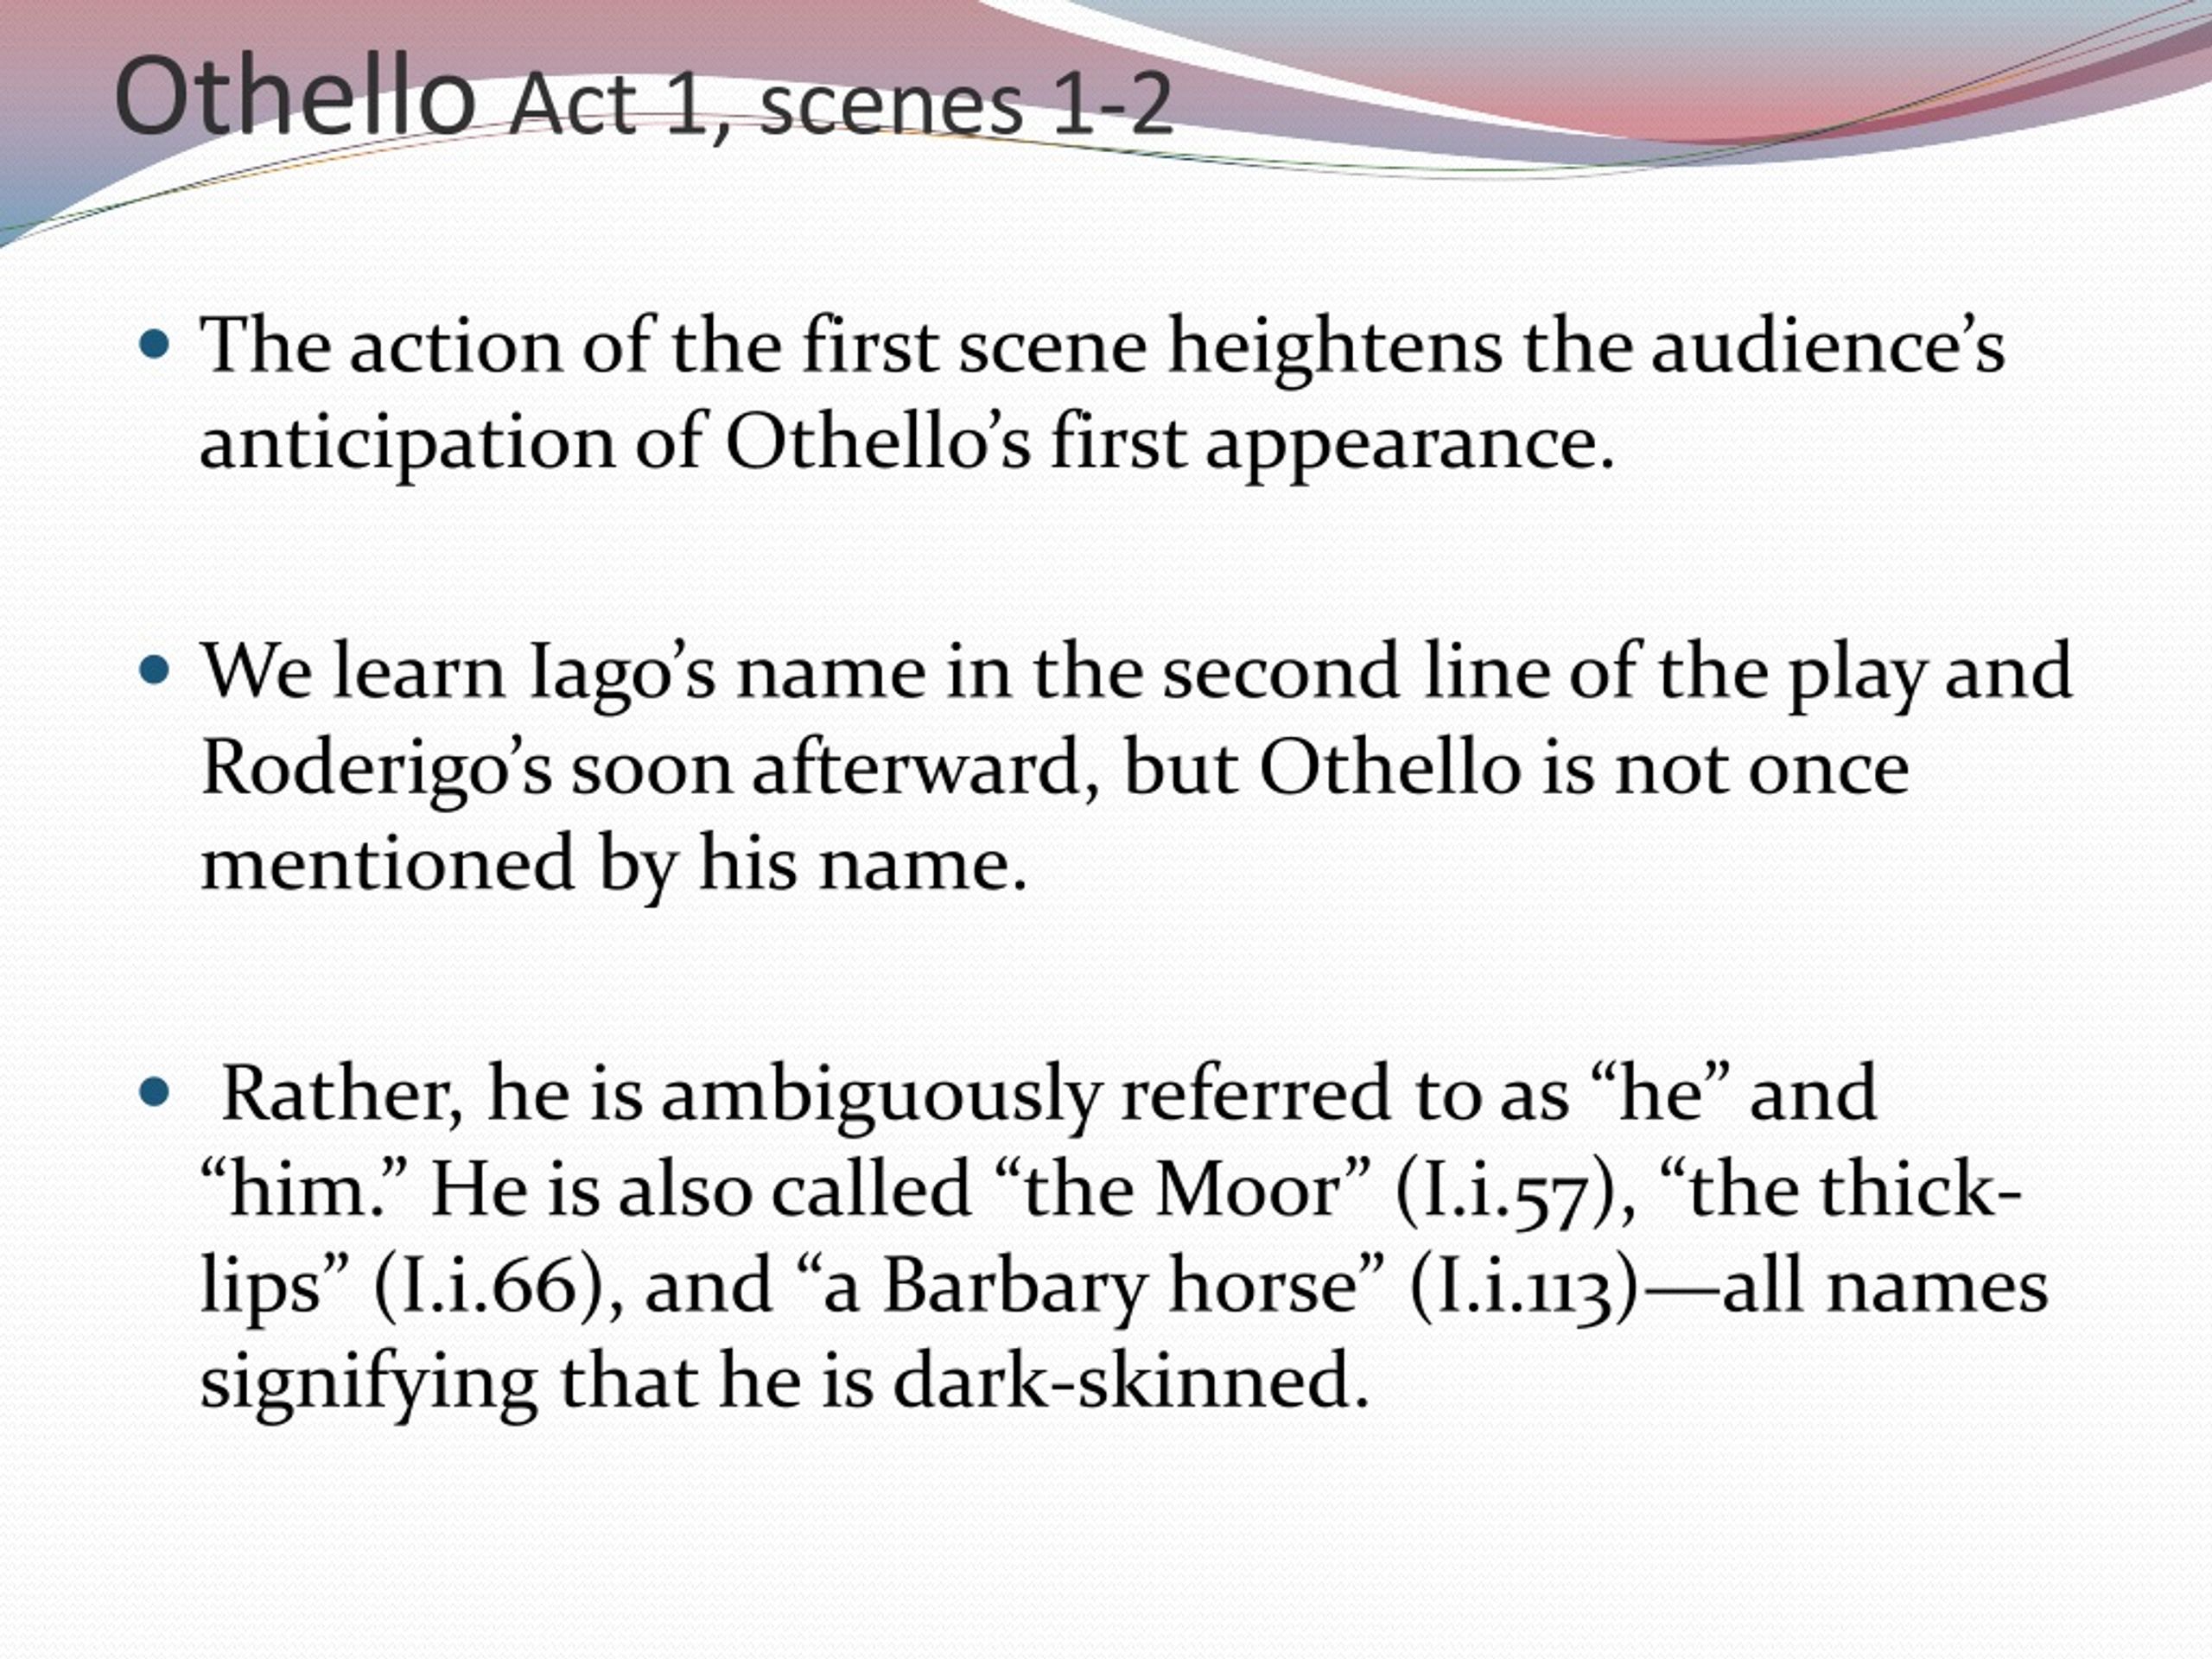 presentation of othello in act 1